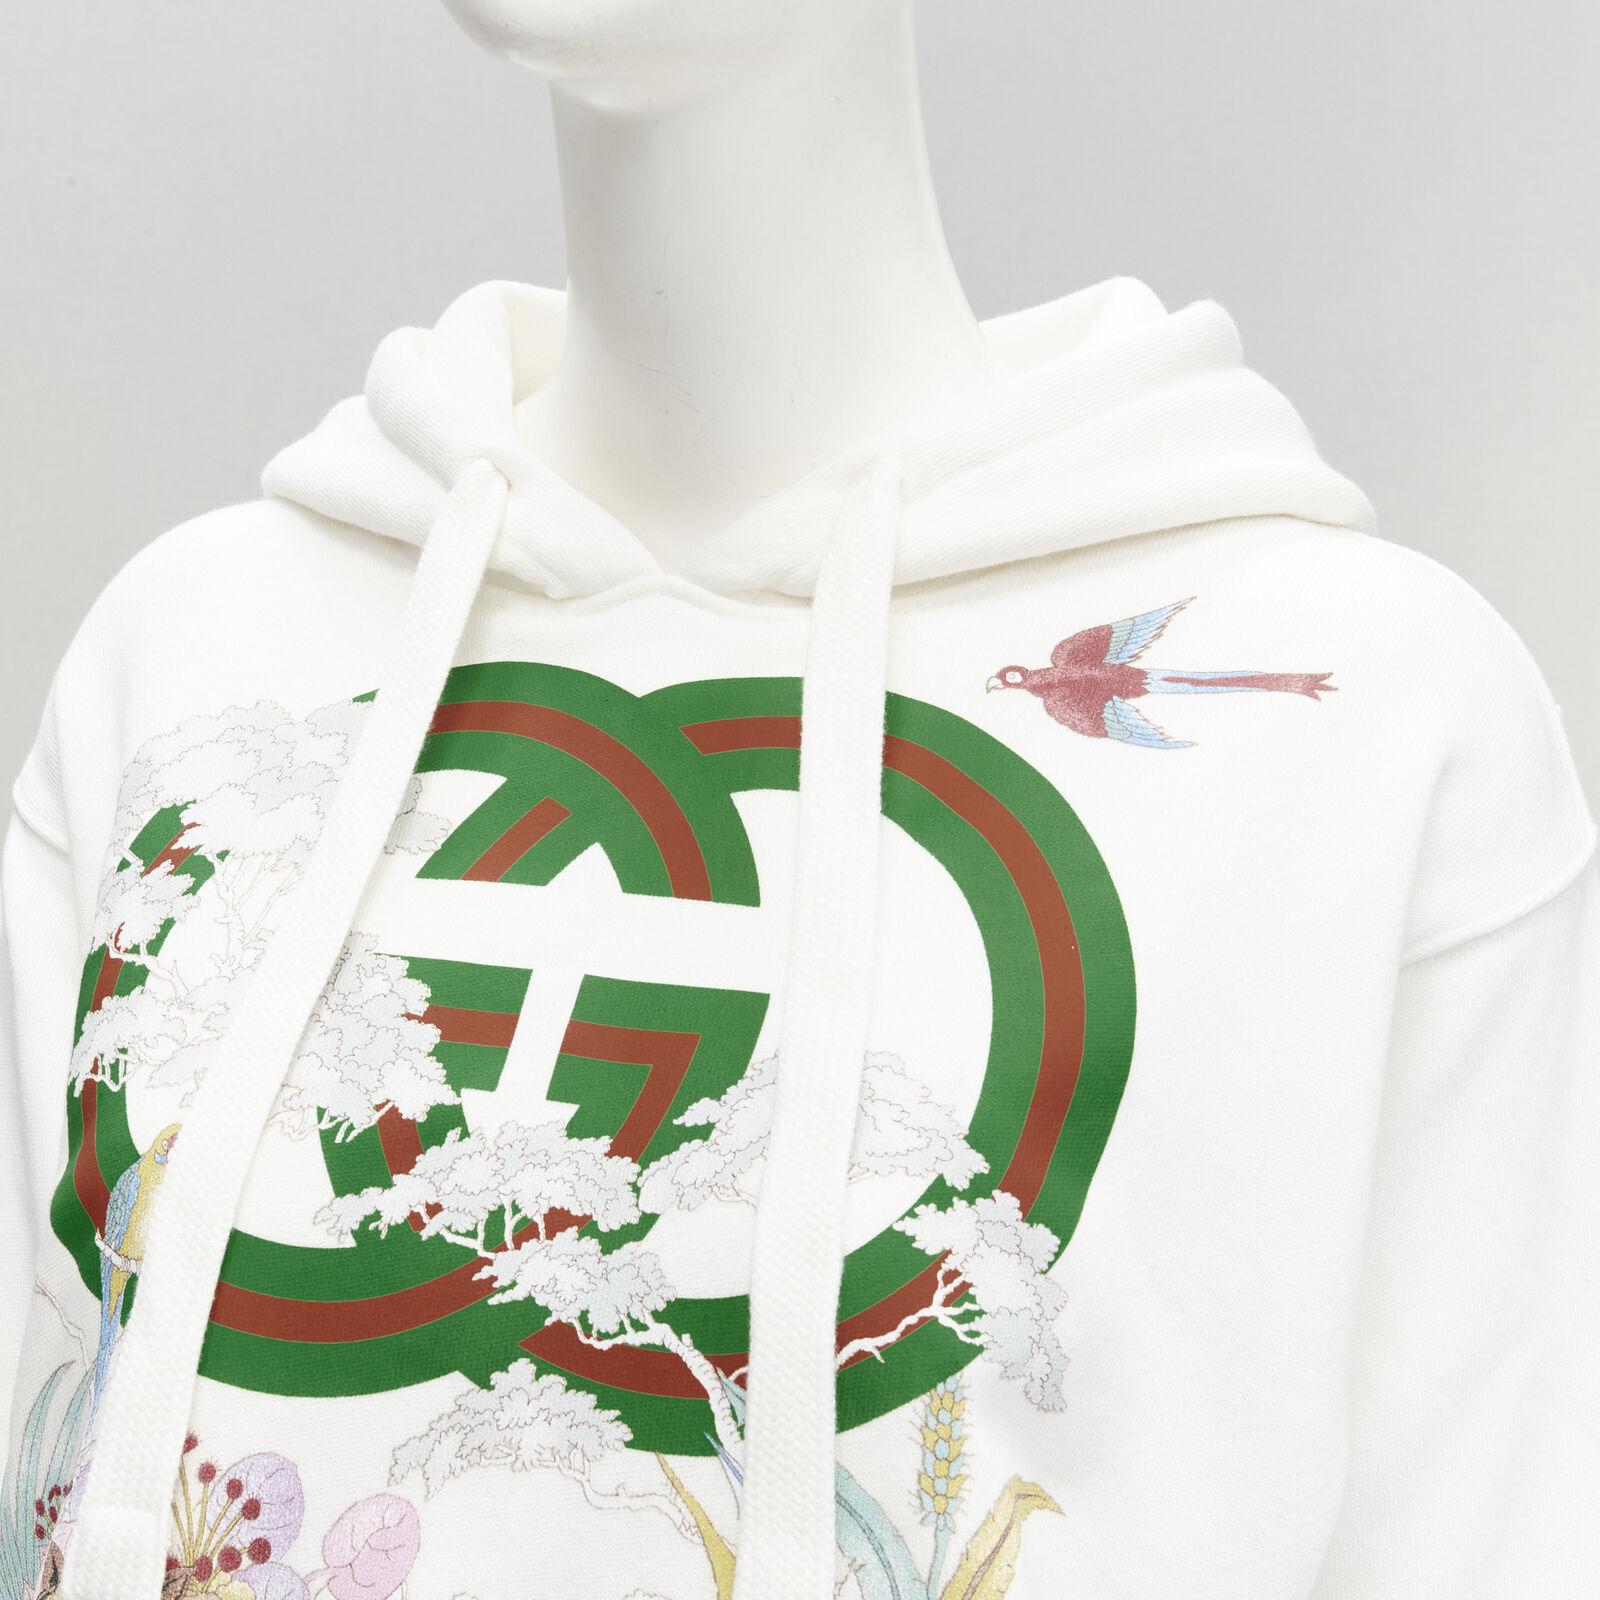 GUCCI Alessandro Michele 100% cotton white logo tiger floral print hoodie 3XS
Reference: AAWC/A00102
Brand: Gucci
Designer: Alessandro Michele
Material: Cotton
Color: Off White
Pattern: Floral
Closure: Drawstring
Made in: